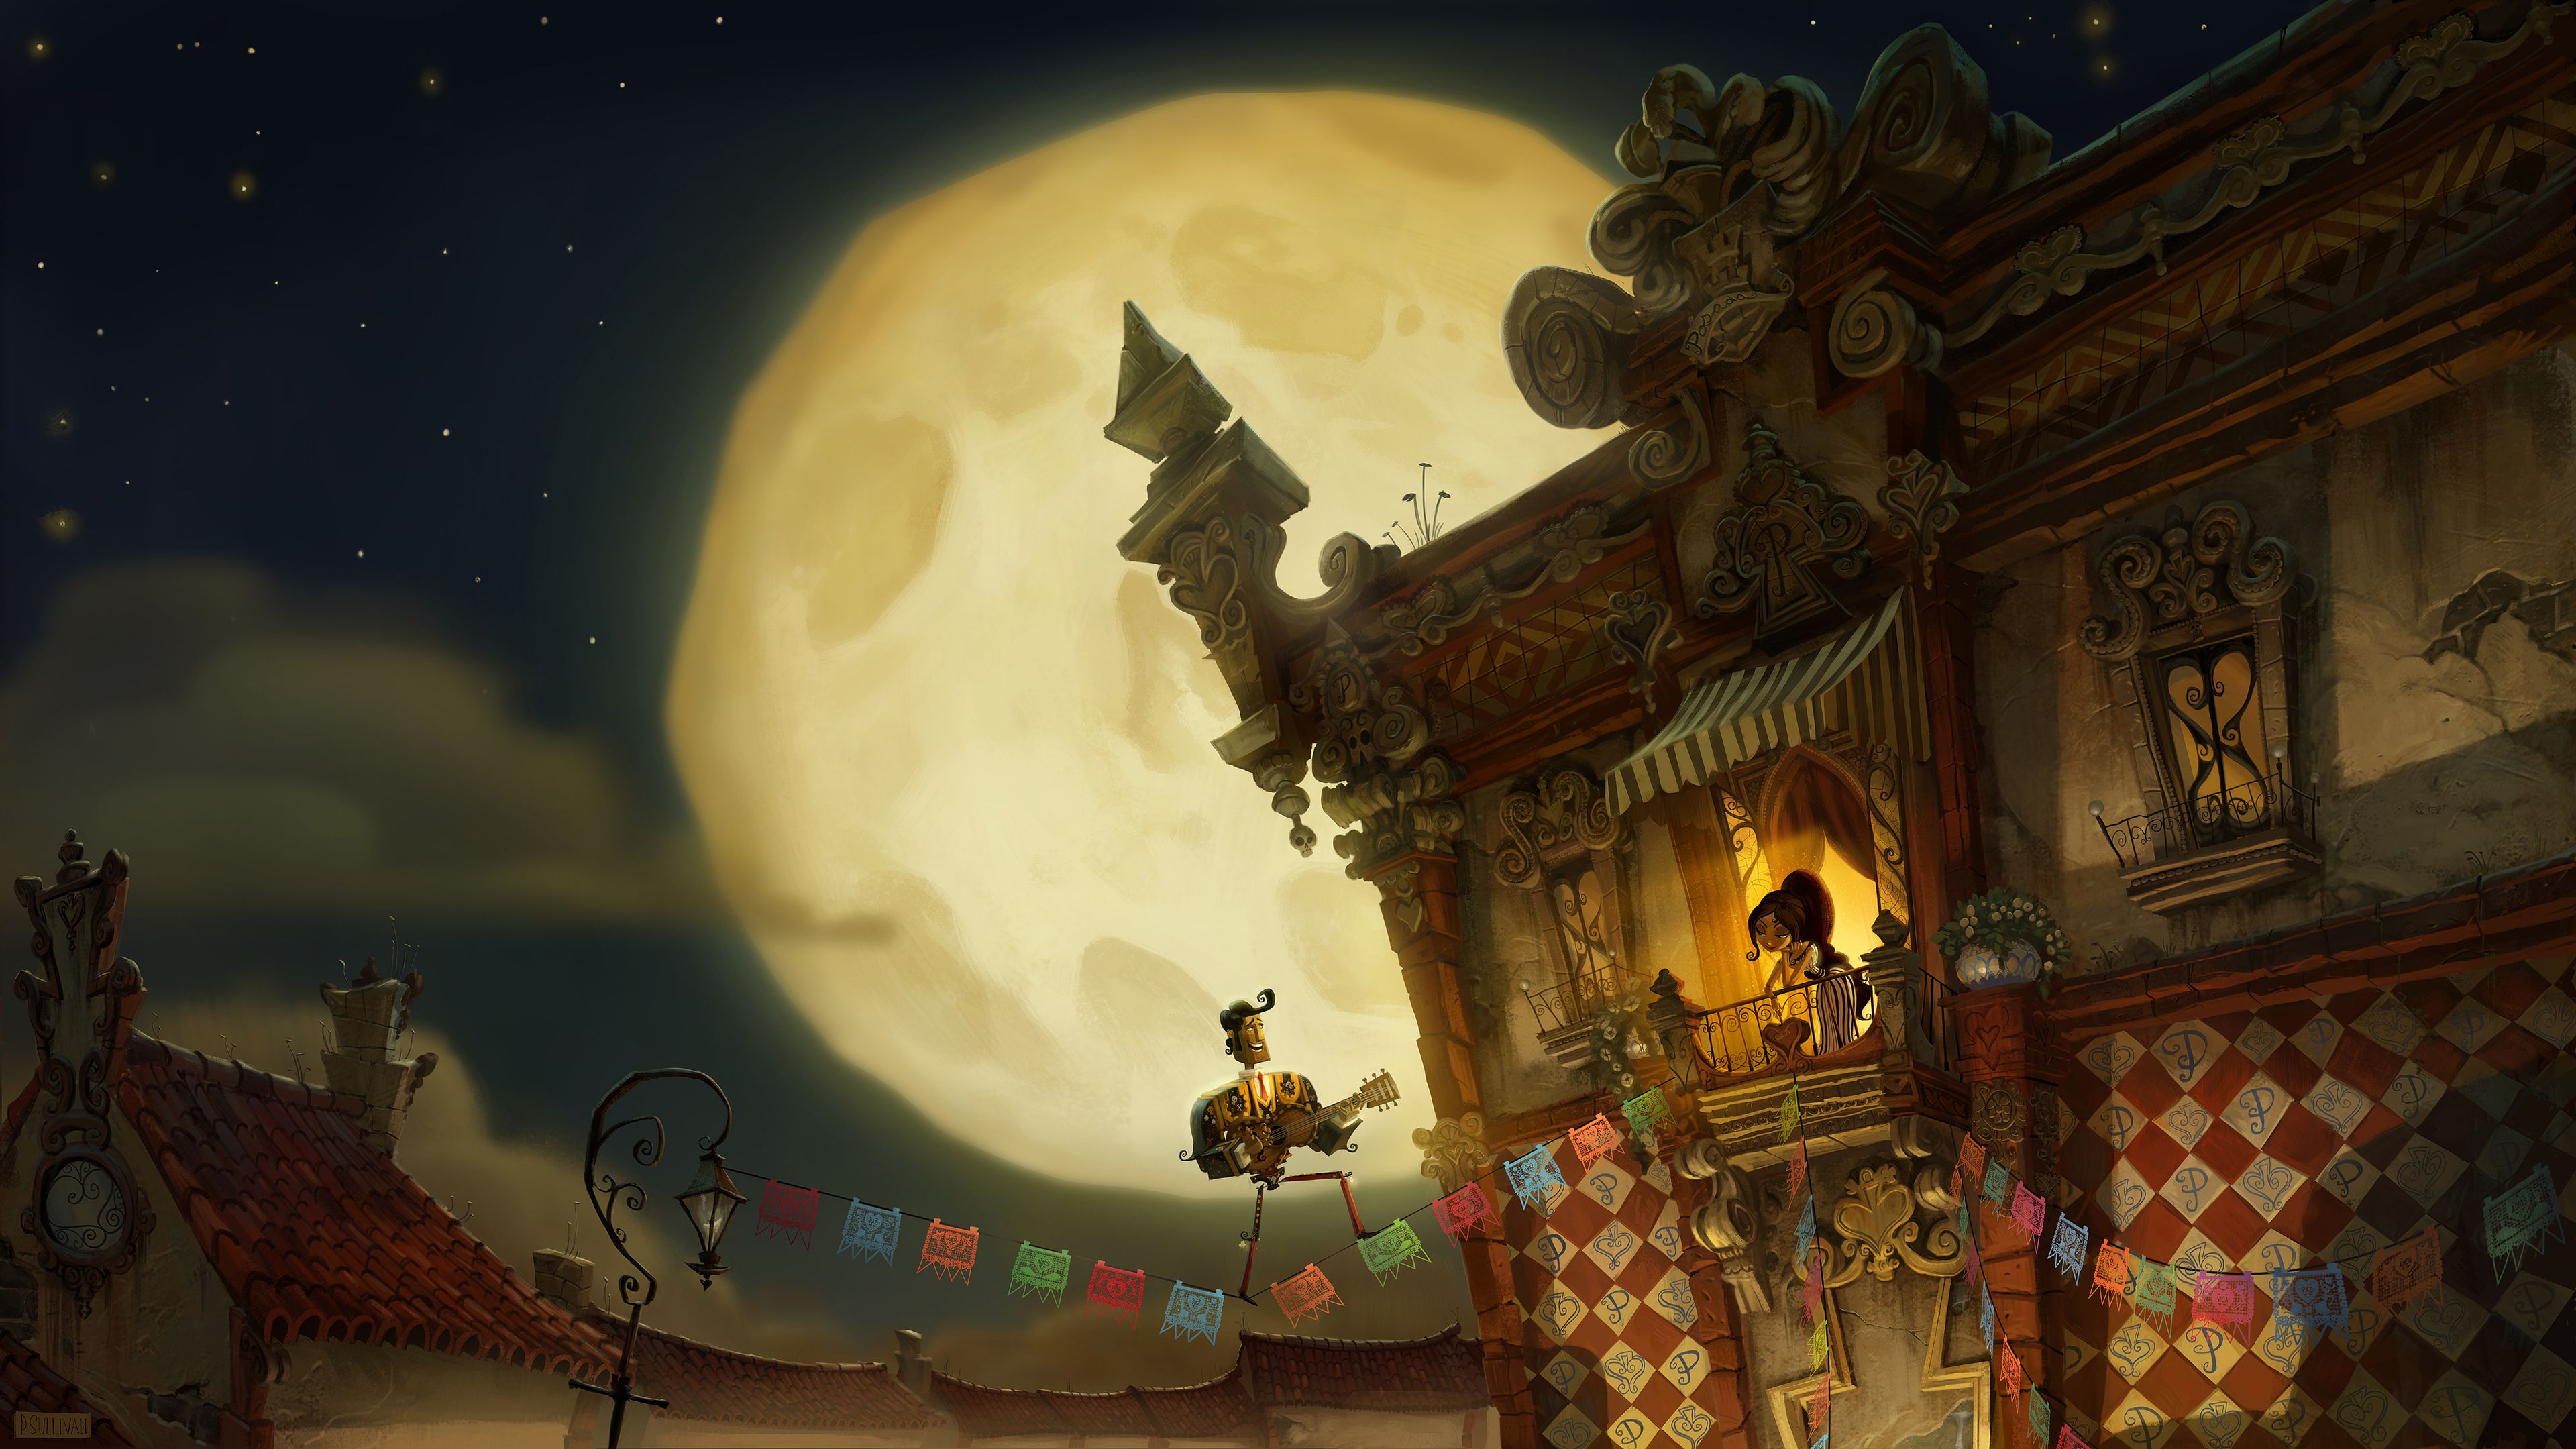 Manolo (The Book of Life) HD Wallpaper